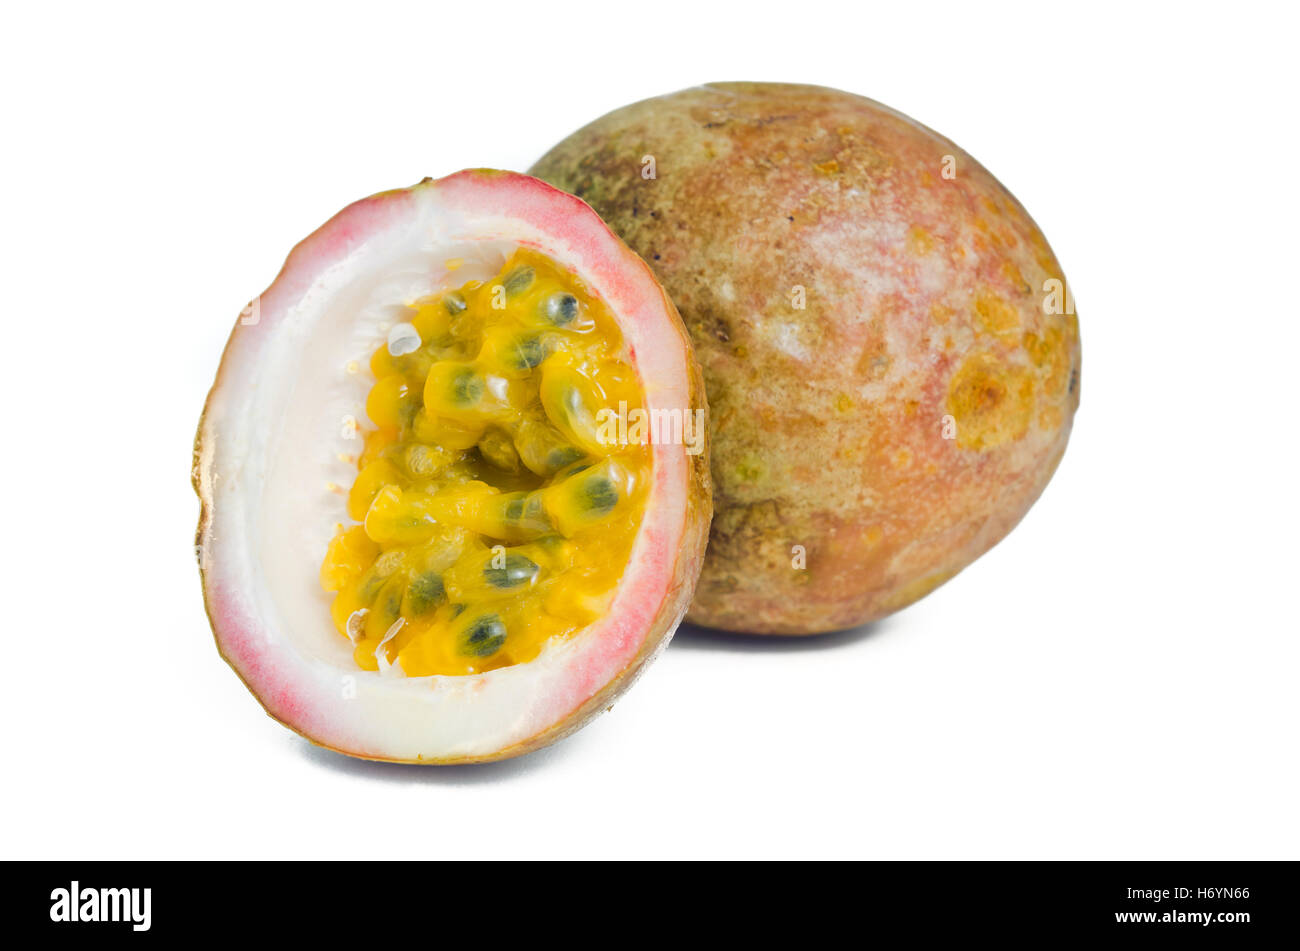 Passion fruit (also named as Passiflora edulis, granadilla in Spanish,  granadille in French, maracuja in Protuguese, passion fru Stock Photo -  Alamy